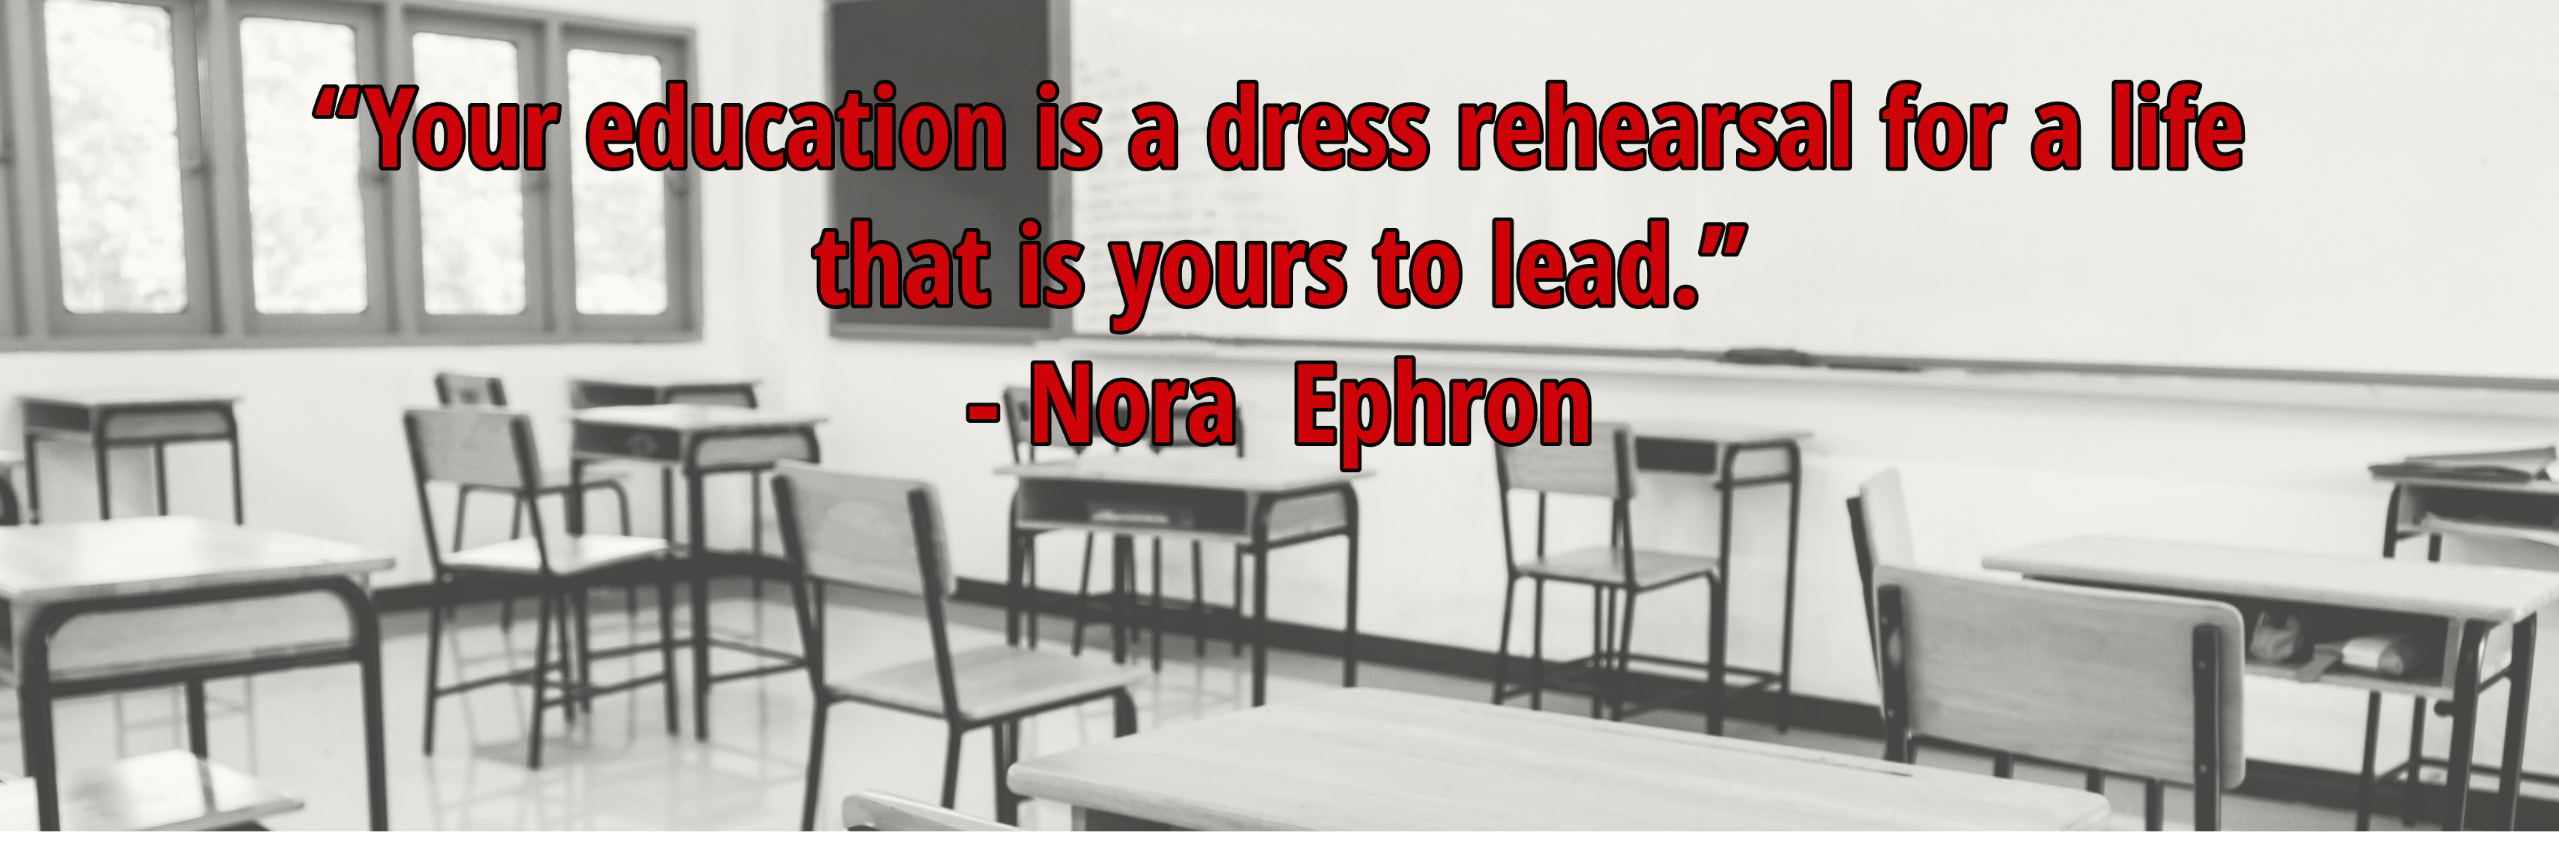 “Your education is a dress rehearsal for a life that is yours to lead.”  - Nora  Ephron